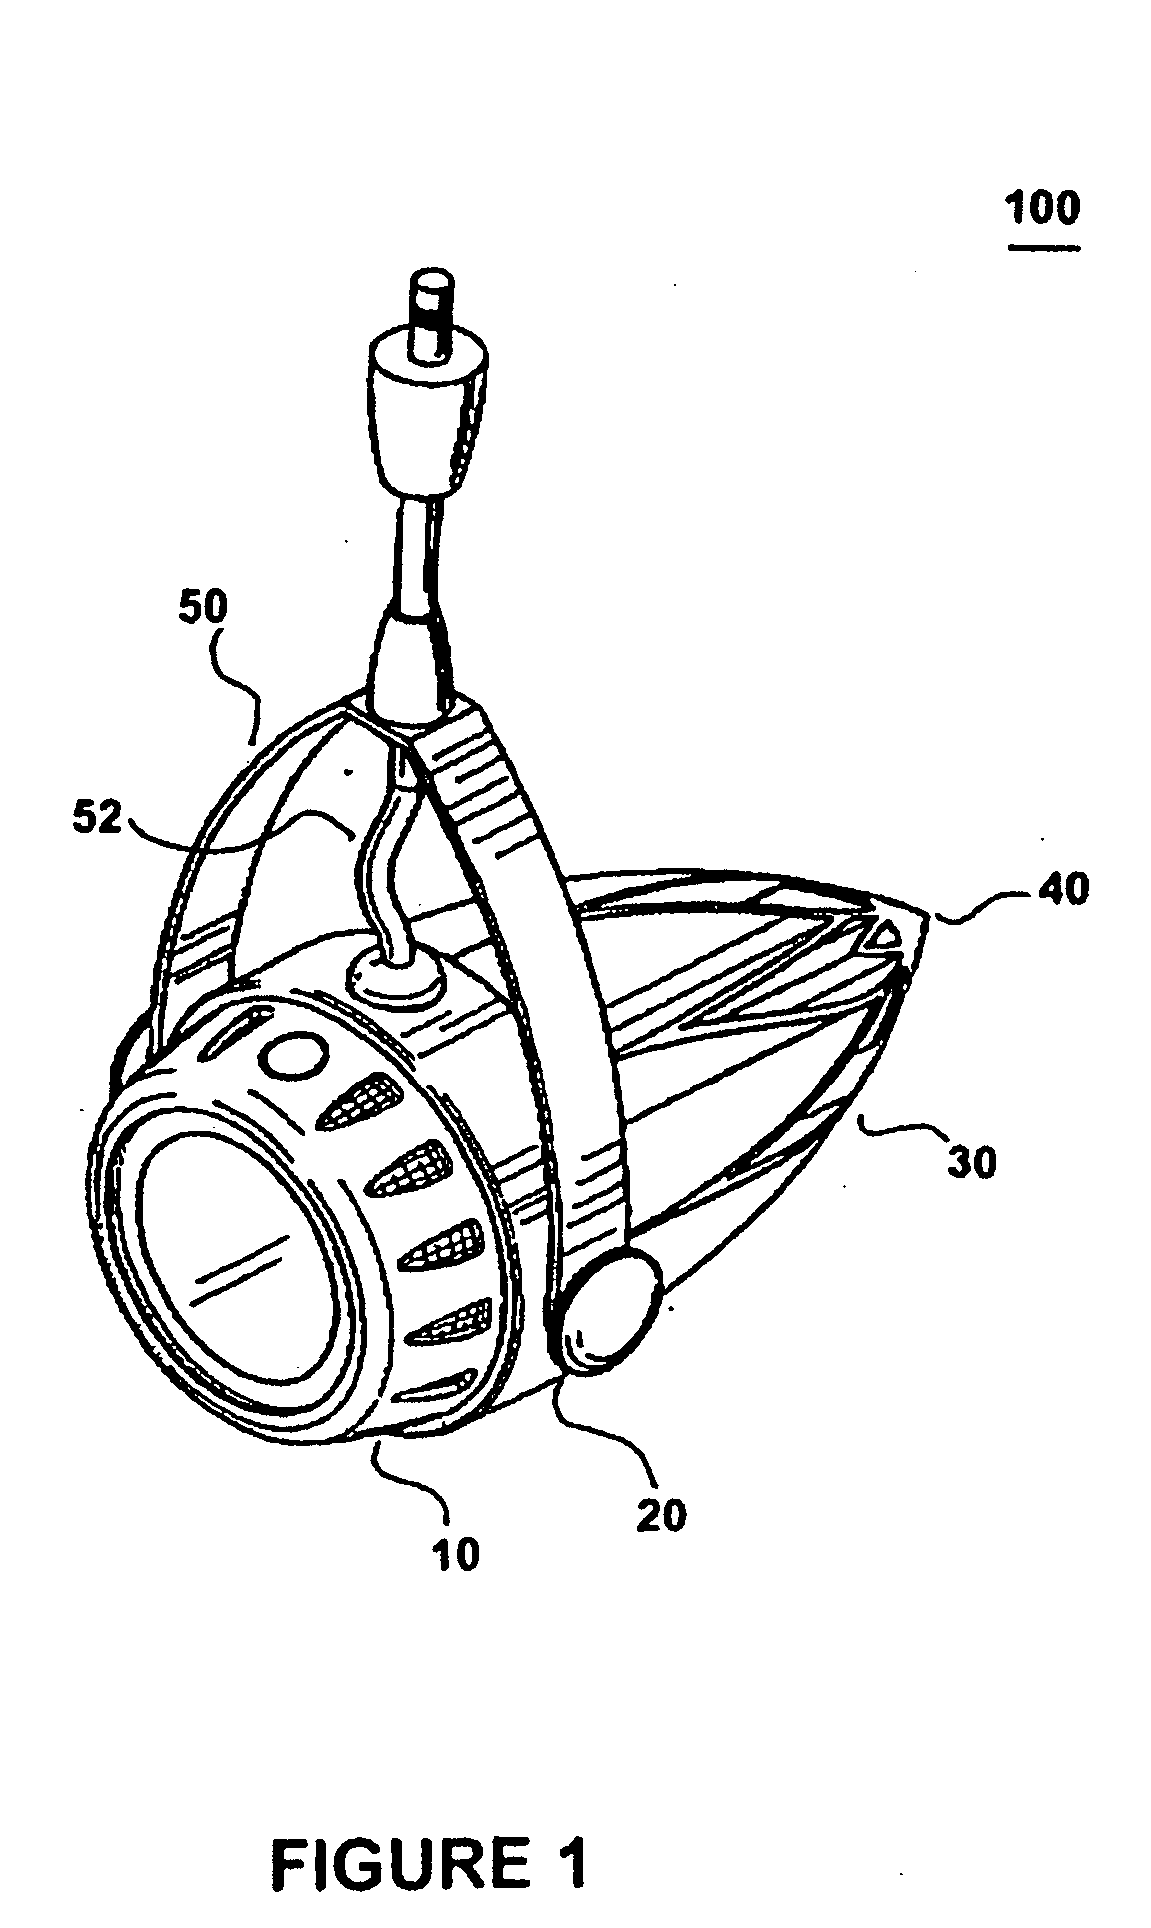 Lighting assembly having a heat dissipating housing